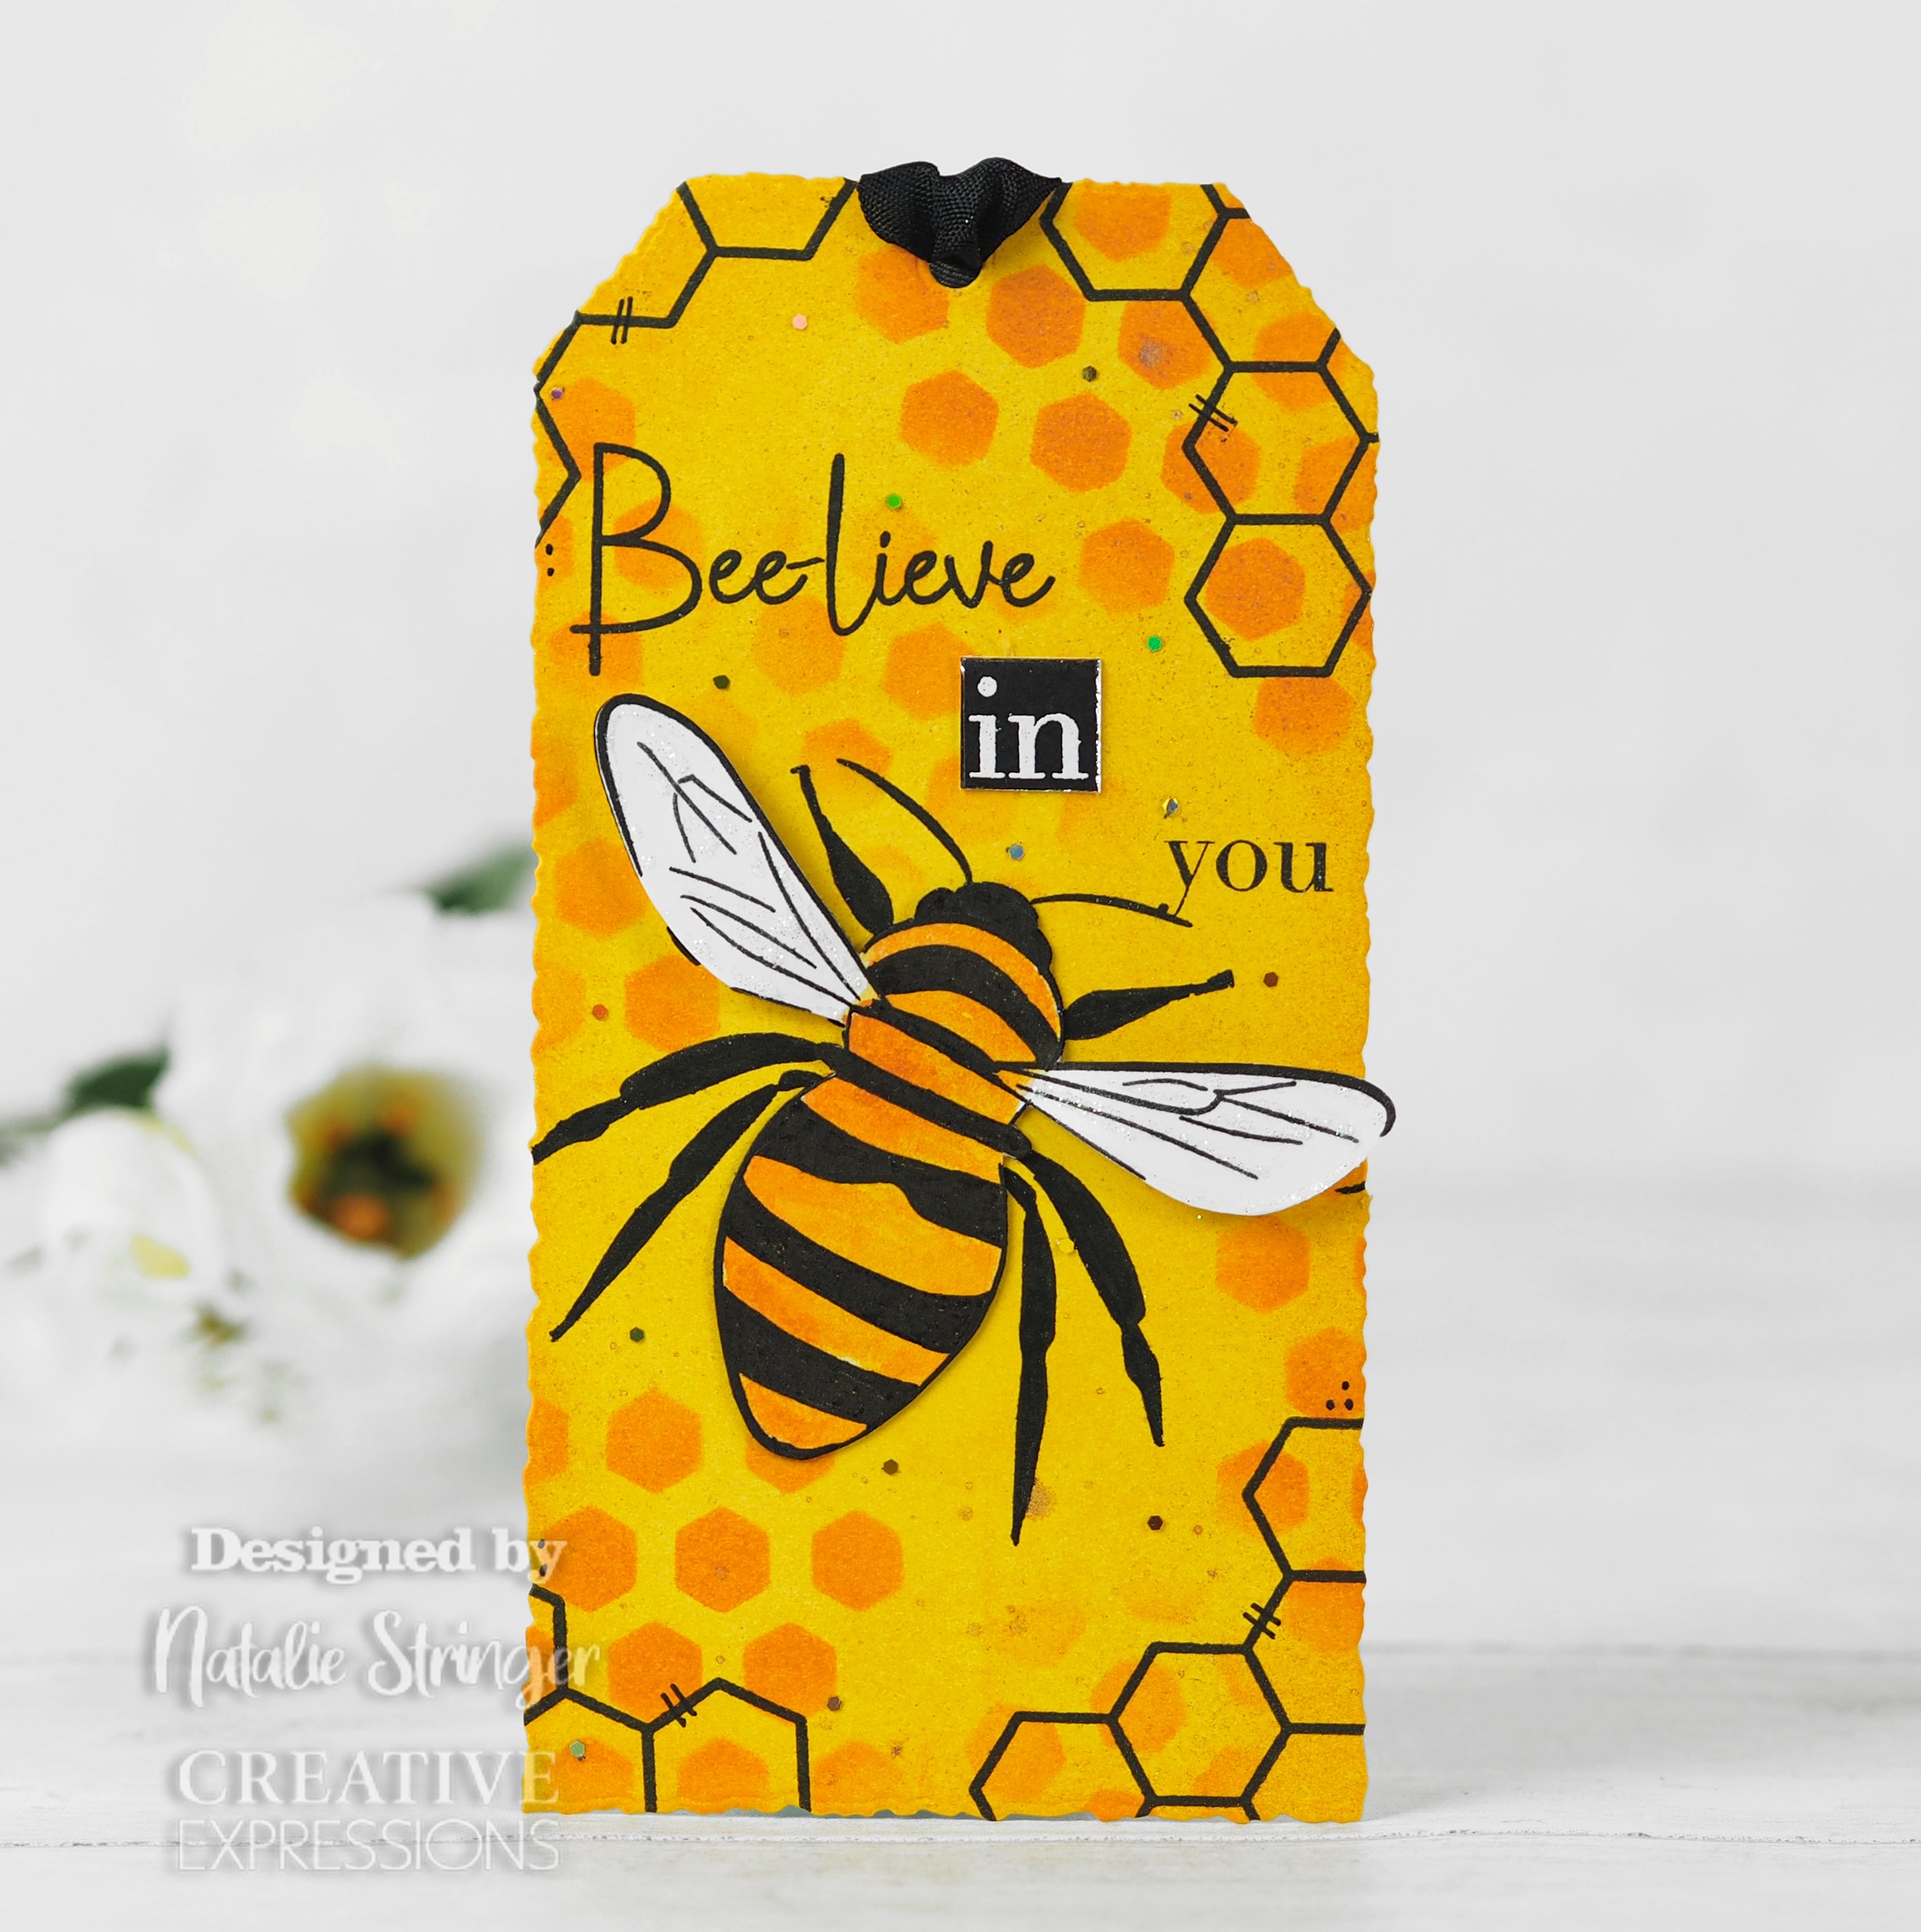 Creative Expressions Bonnita Moaby Queen Bee A5 Clear Stamp Set